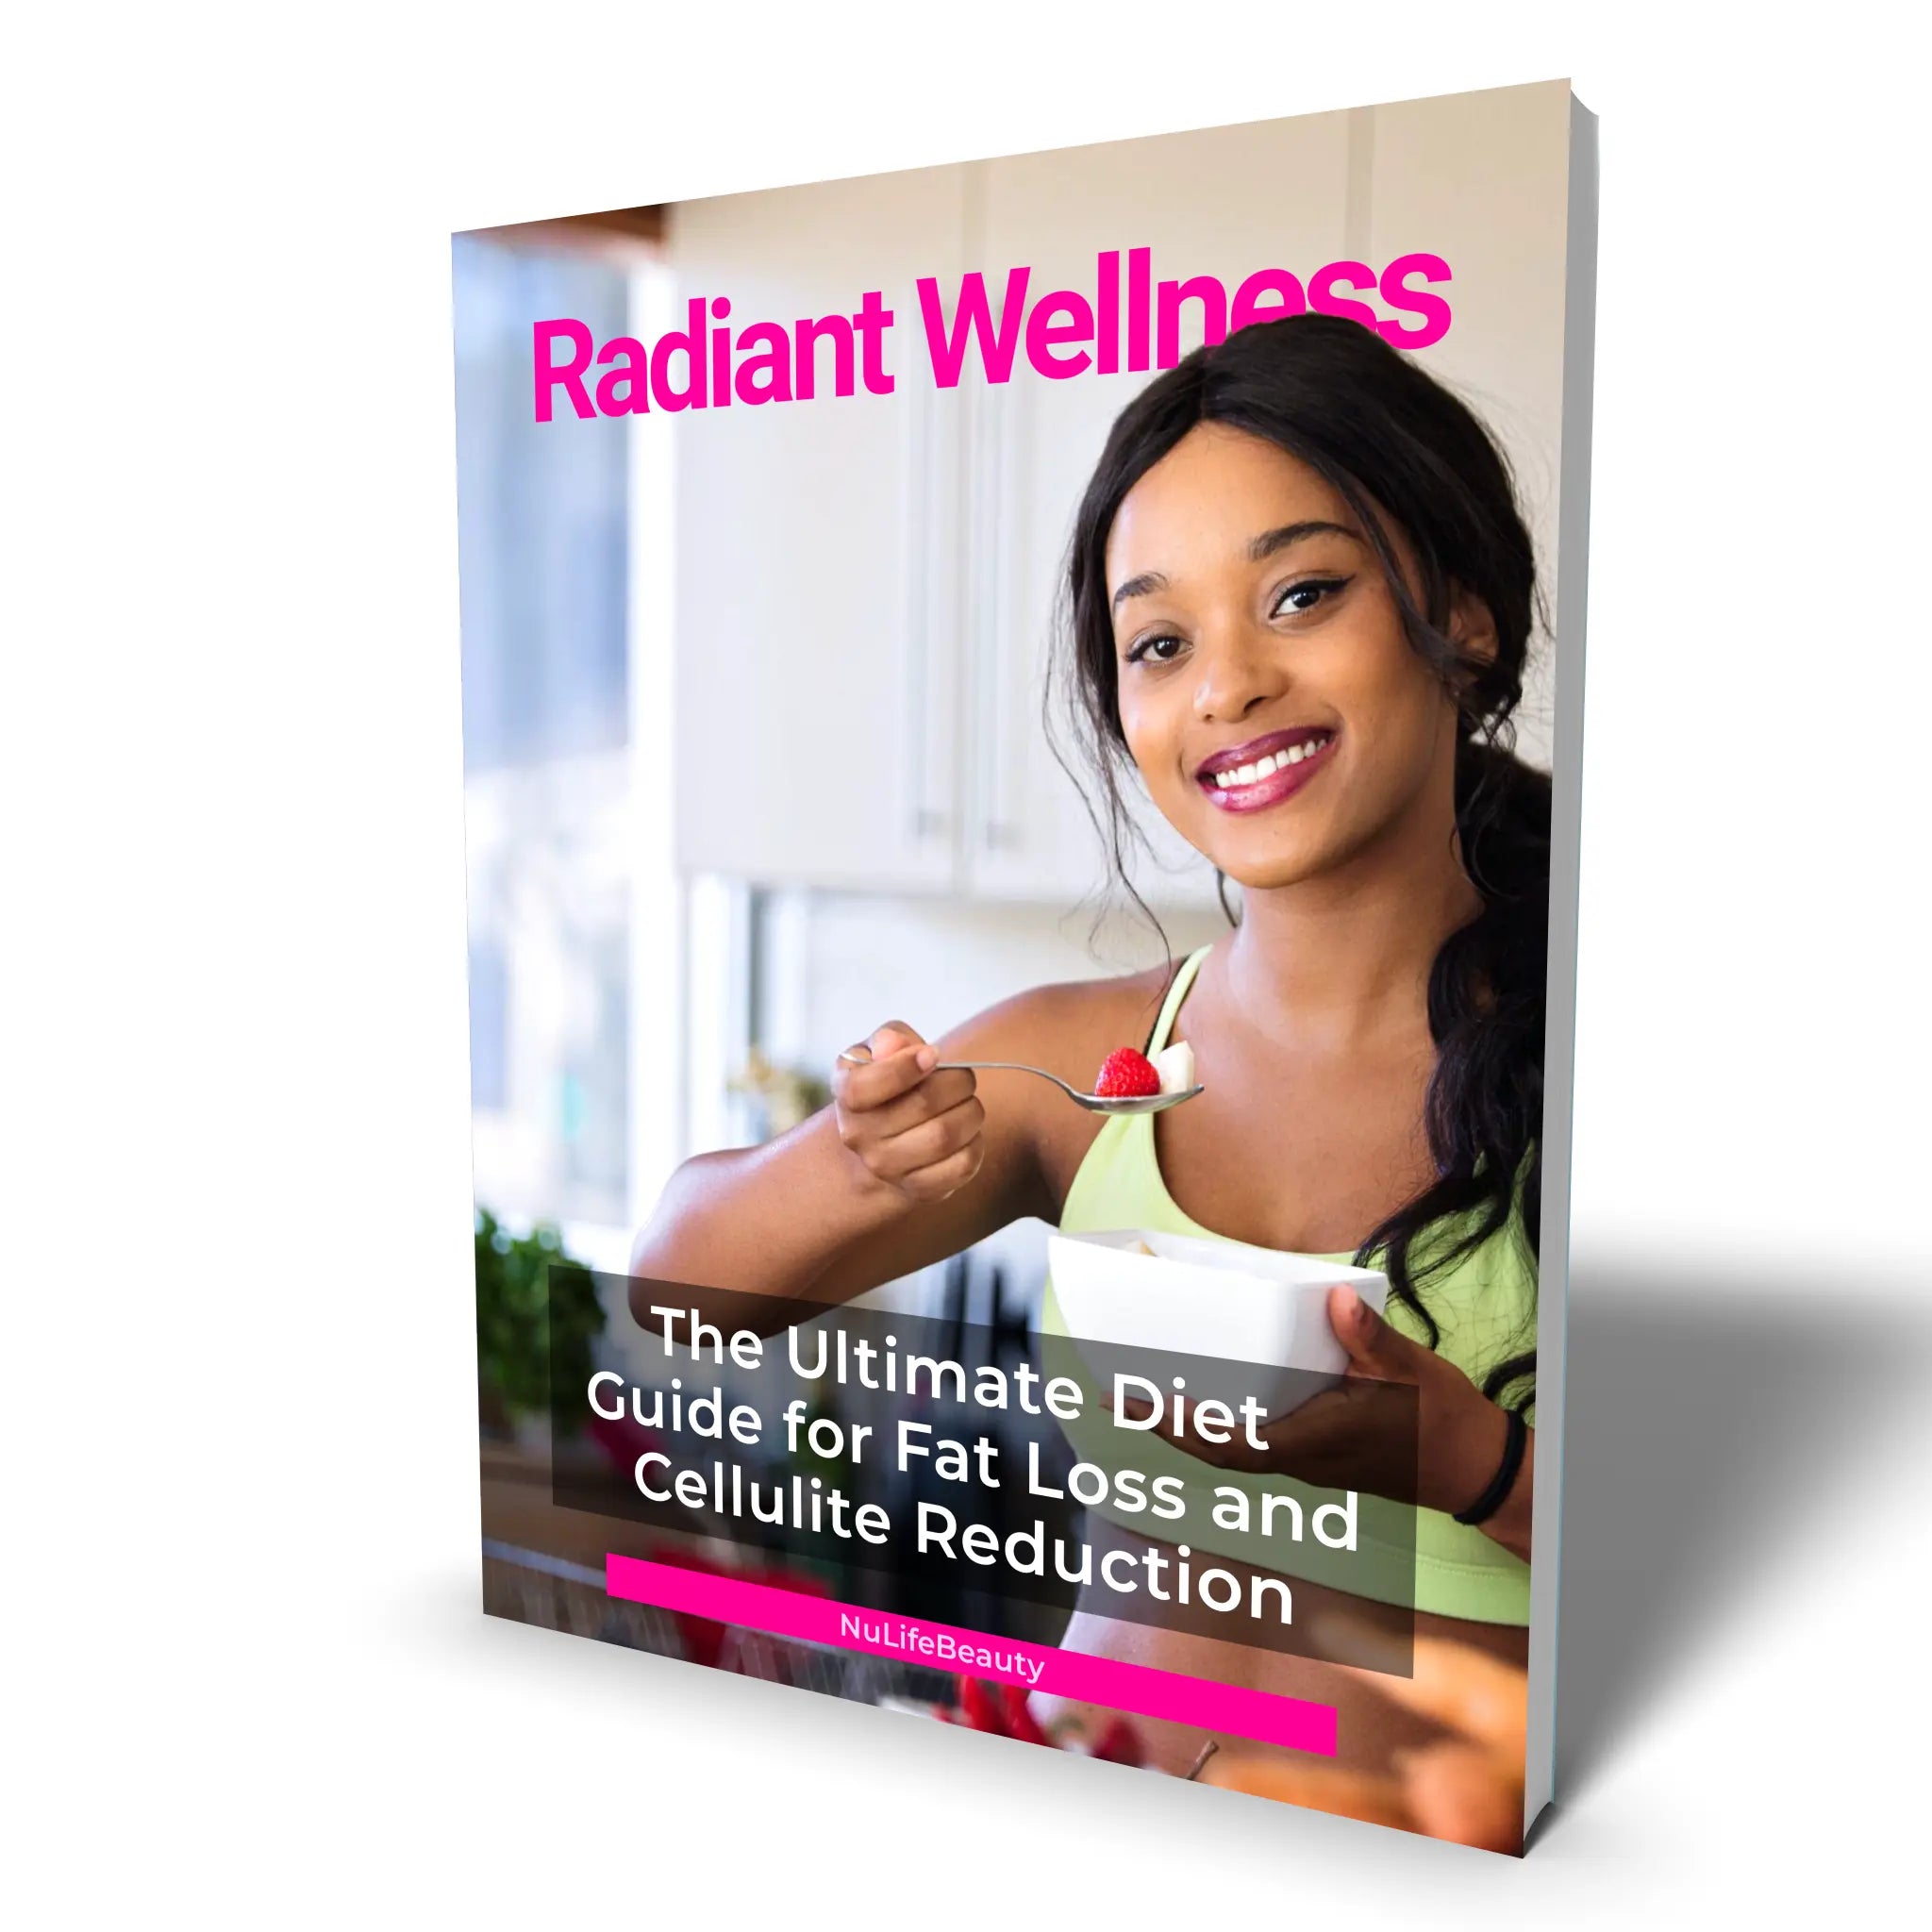 Radiant Wellness: The Ultimate Diet Guide for Fat Loss and Cellulite Reduction